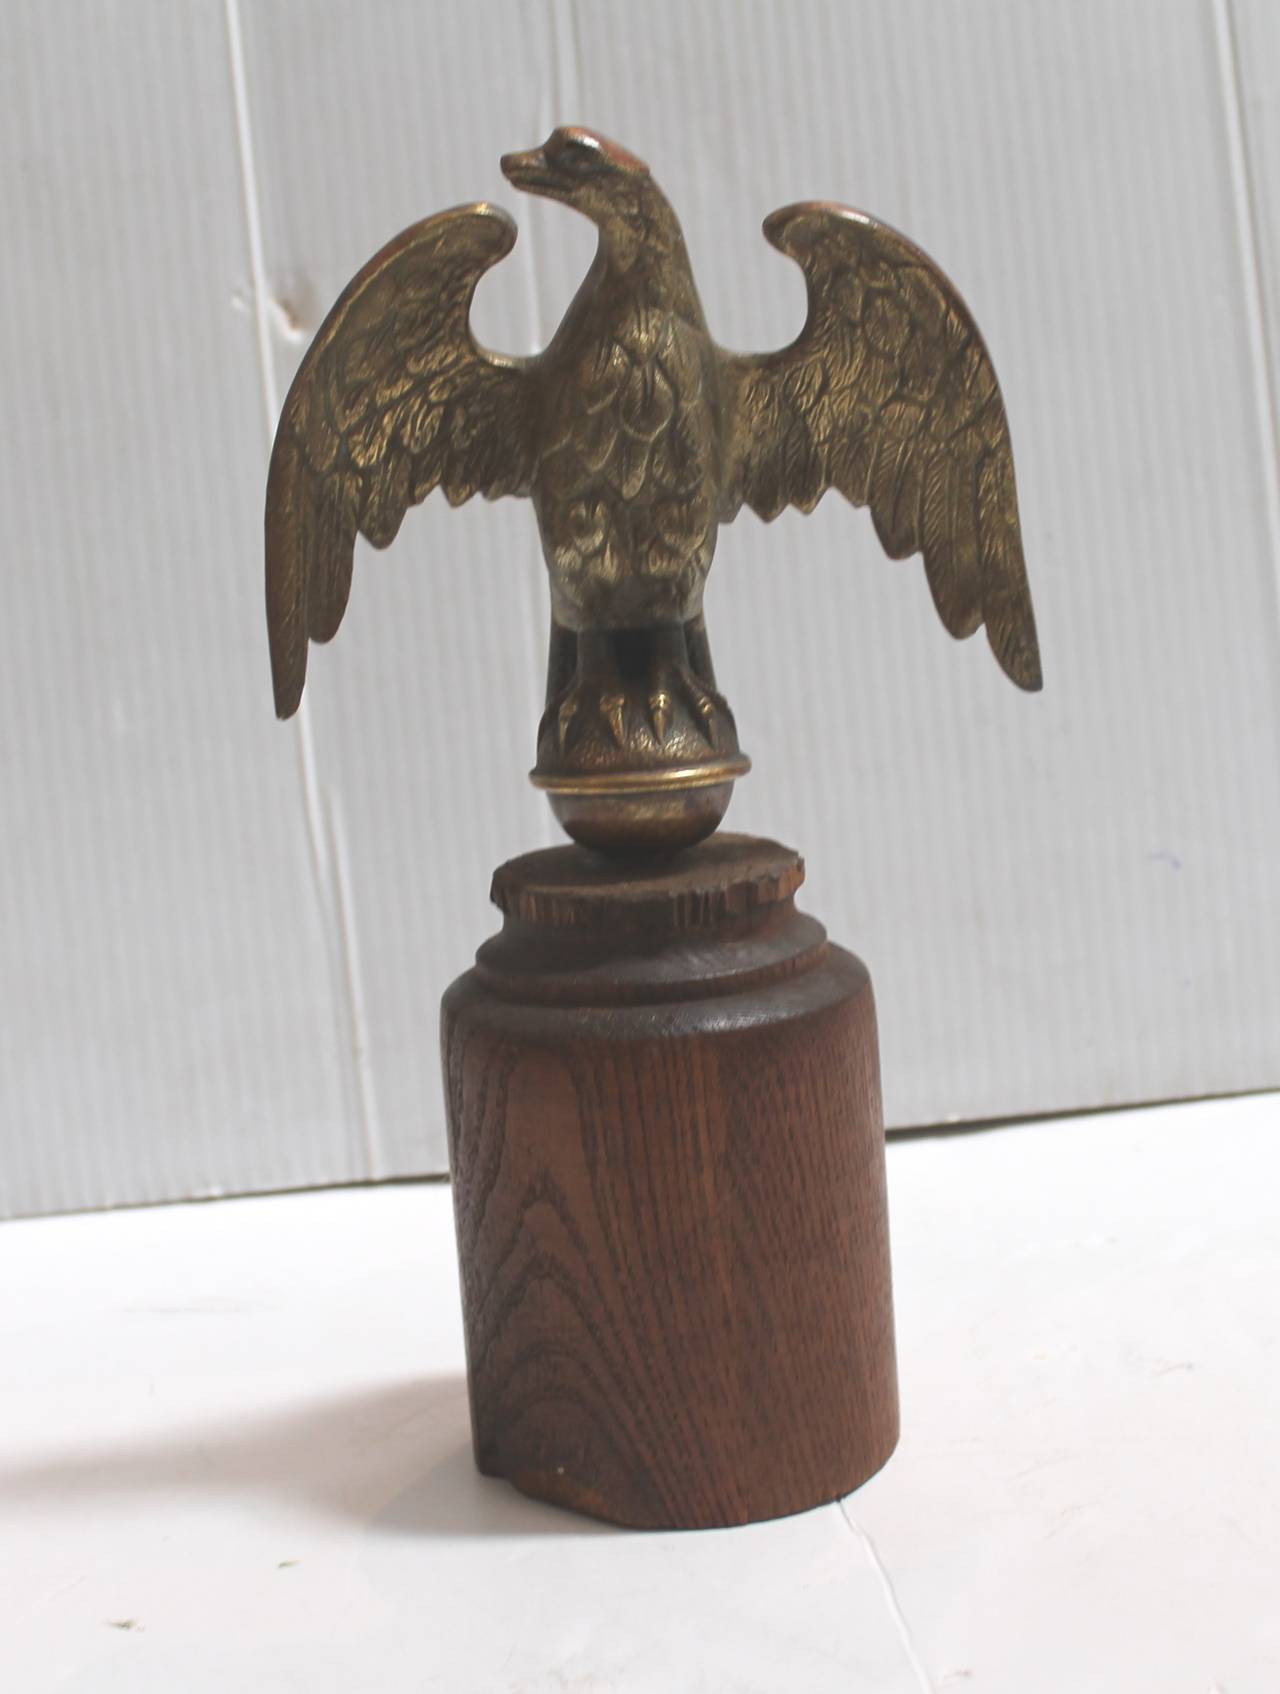 This is a wonderful worn and aged brass eagle from what looks like it sat on top of a flag post. It has a wonderful old surface with minor consistent from age and use. This was found in Pennsylvania. This is a very heavy and solid brass eagle.